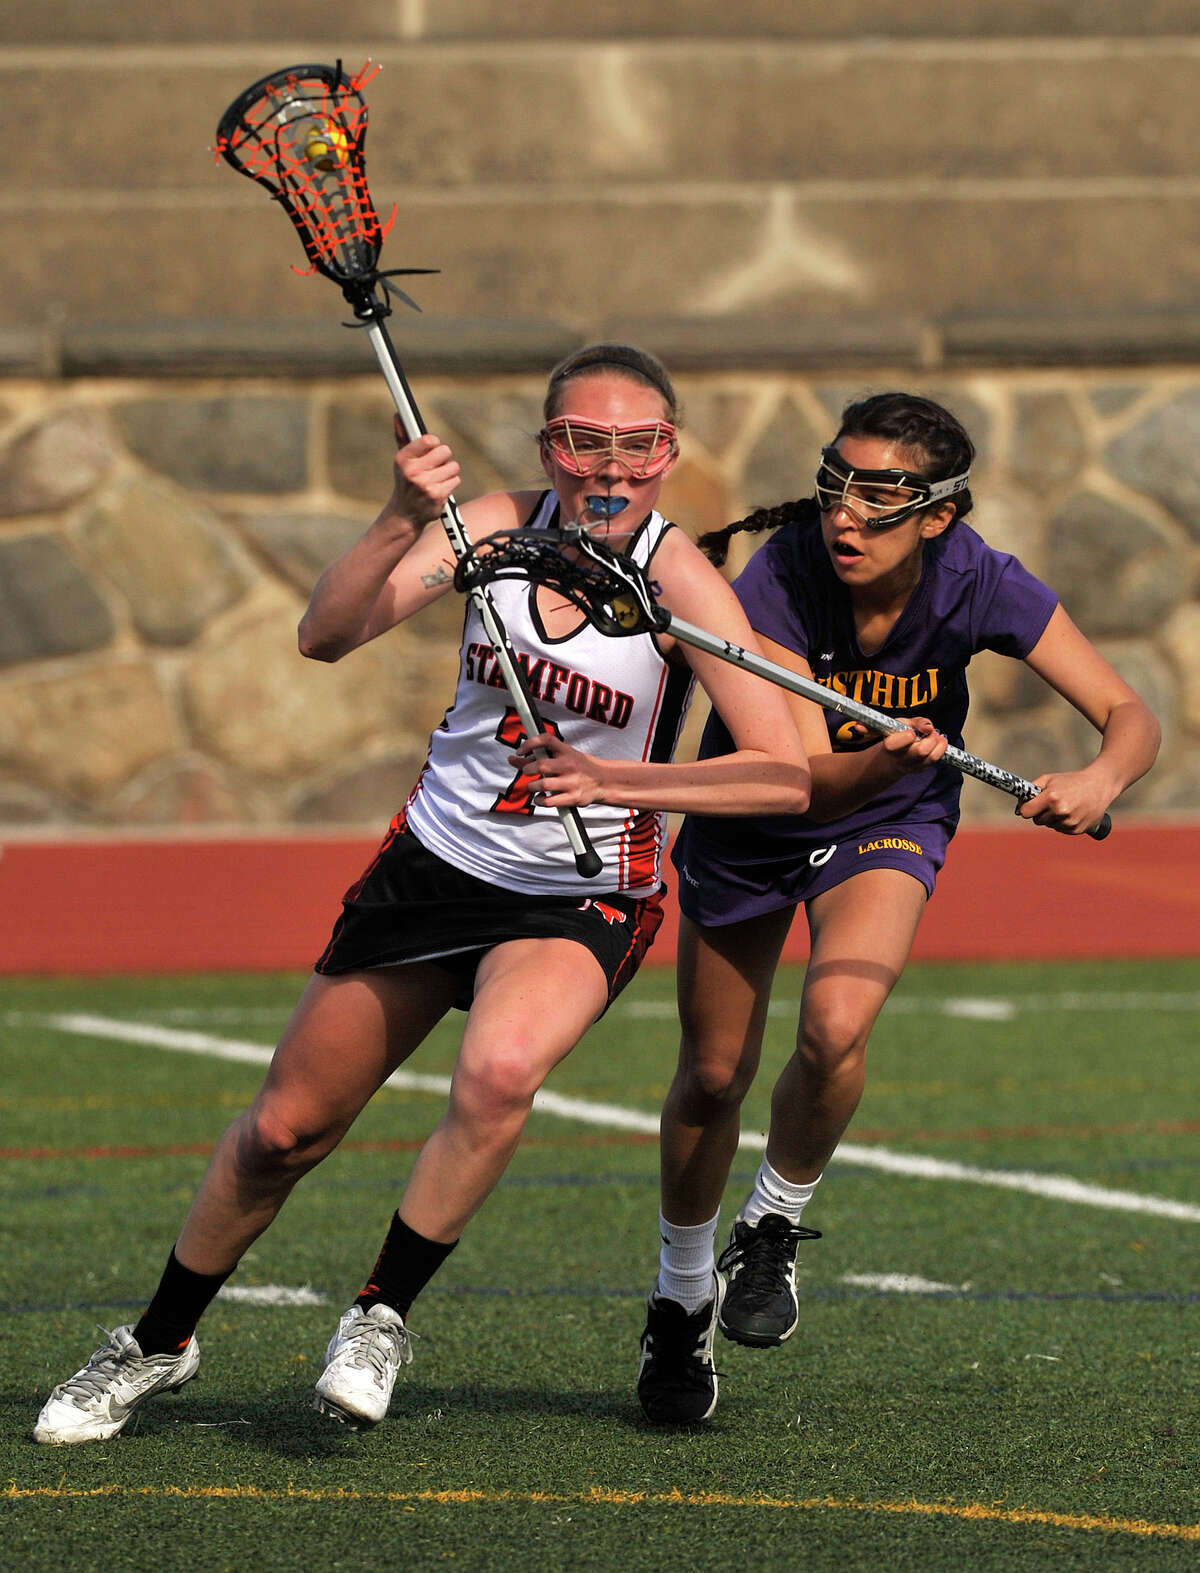 Stamford's Jennifer Krupa fends off Westhill's Alexandra Fischer during their lacrosse game at Stamford High School in Stamford, Conn., on Thursday, April 30, 2015. Stamford won, 14-0.